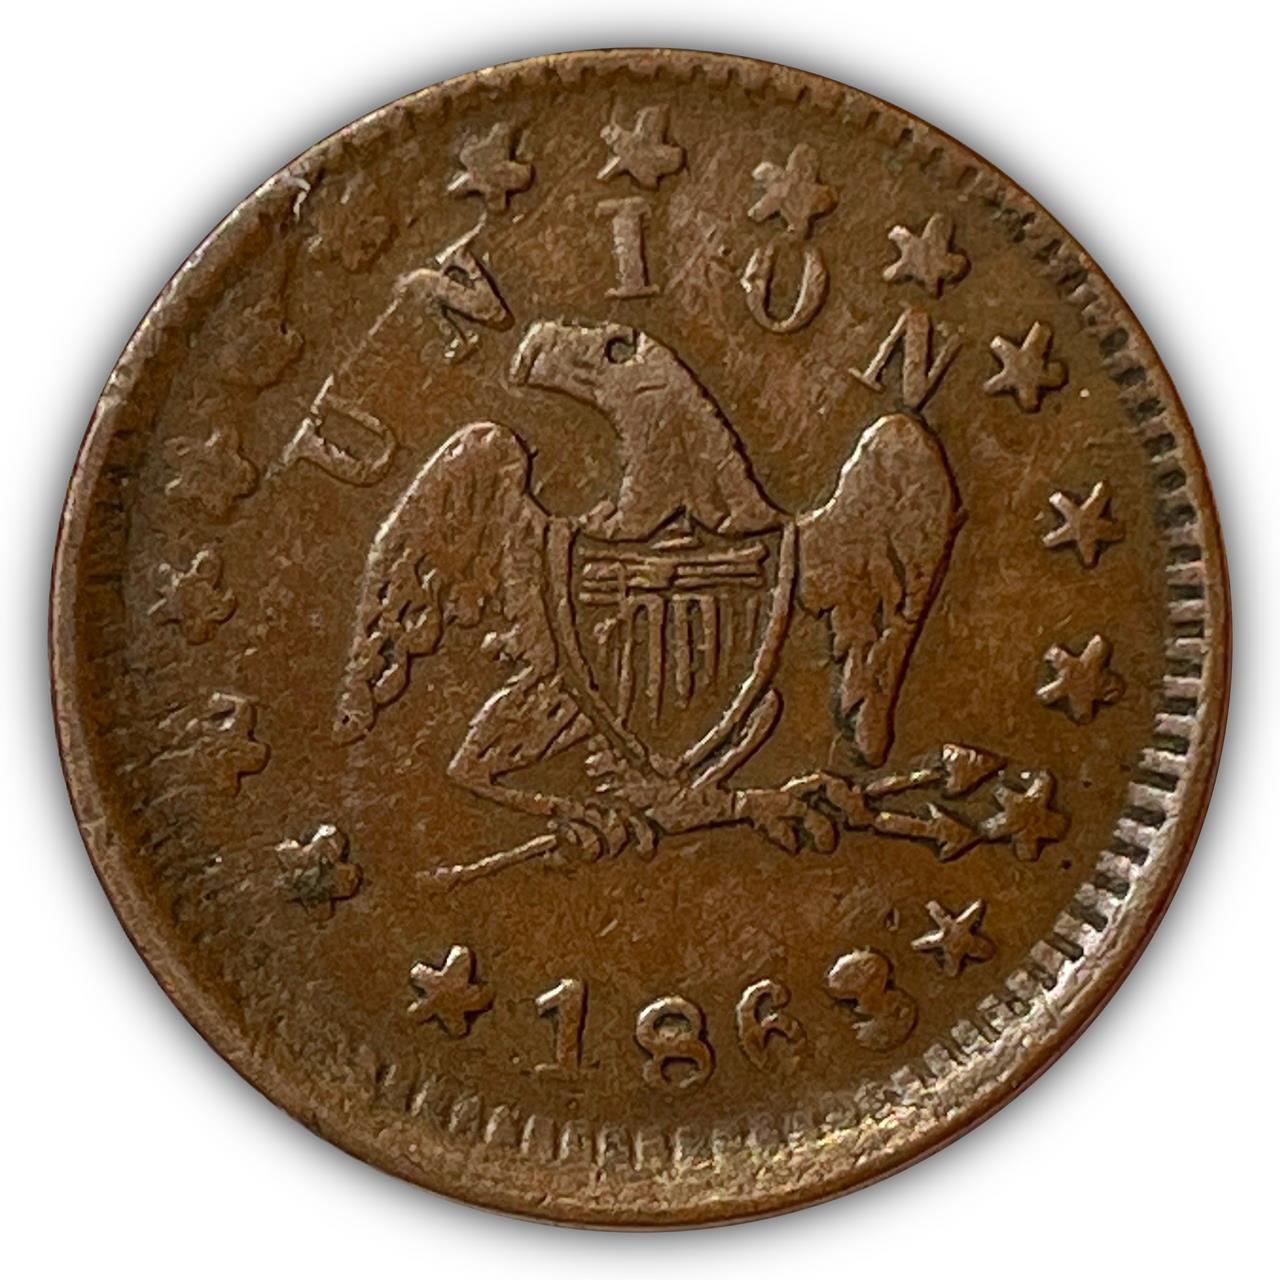 1863 Perched Eagle THE UNION MUST AND SHALL BE PRESERVED Fuld-155/400 CWT #4158